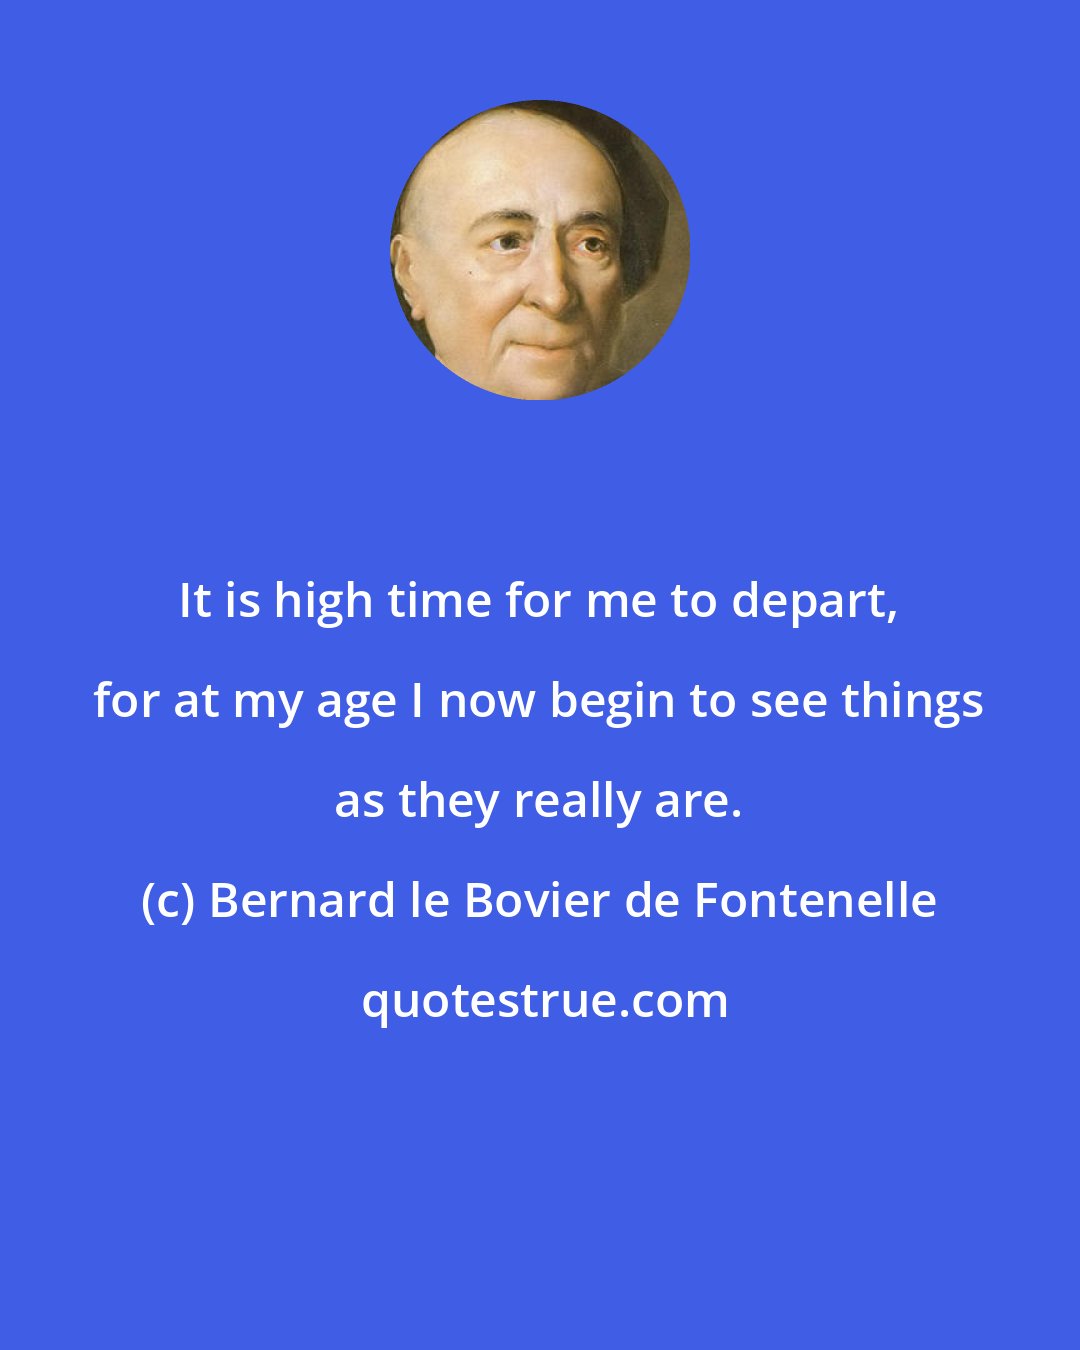 Bernard le Bovier de Fontenelle: It is high time for me to depart, for at my age I now begin to see things as they really are.